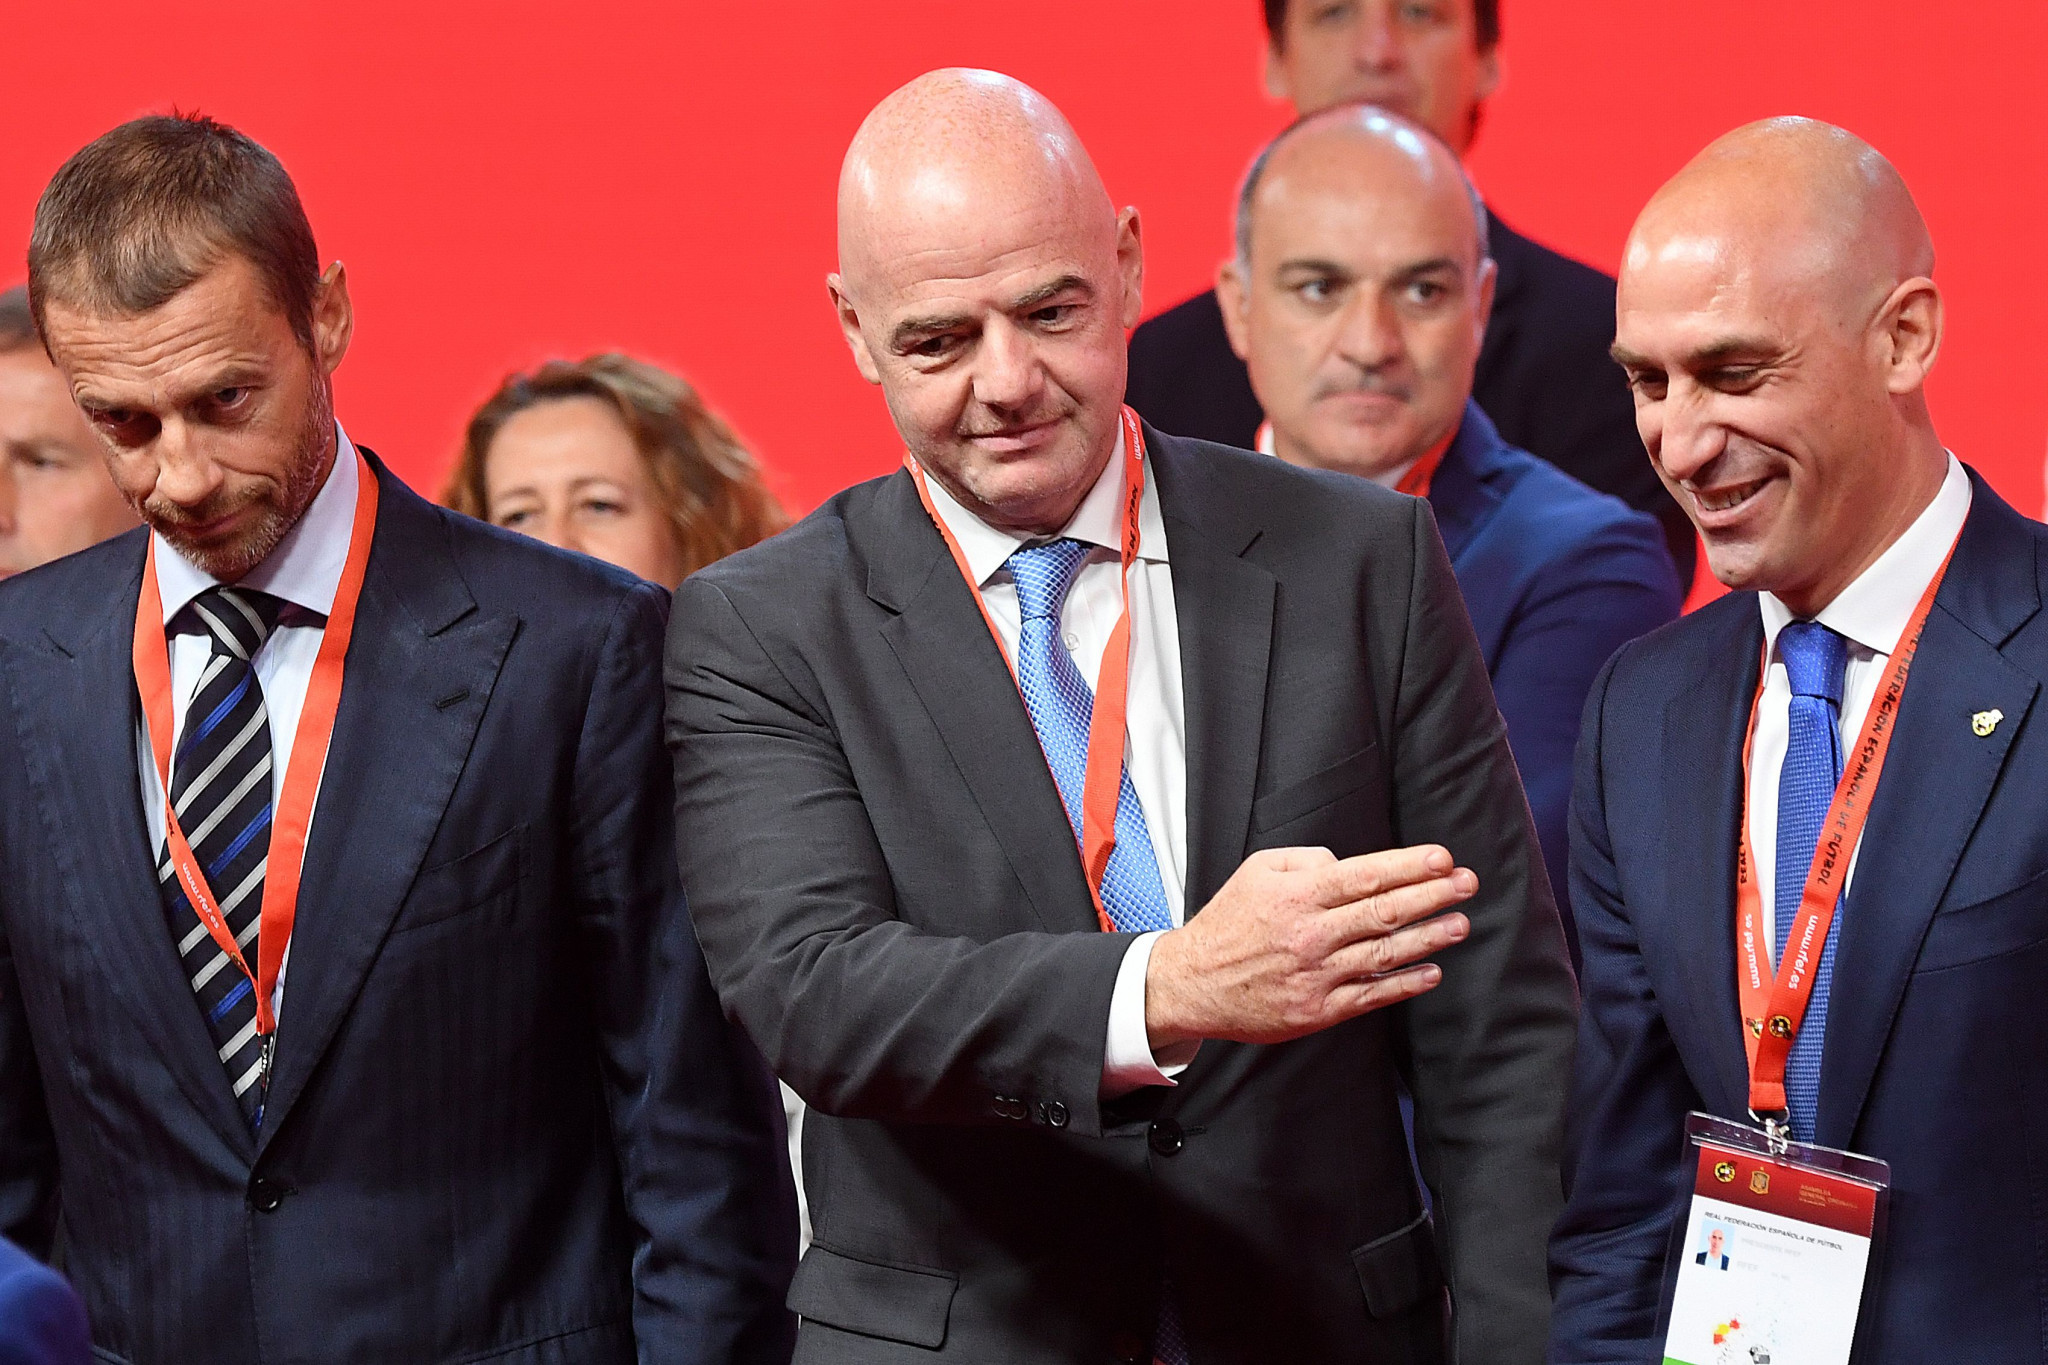 FIFA President Gianni Infantino has continually talked up how the organisation has changed since the corruption scandal ©Getty Images